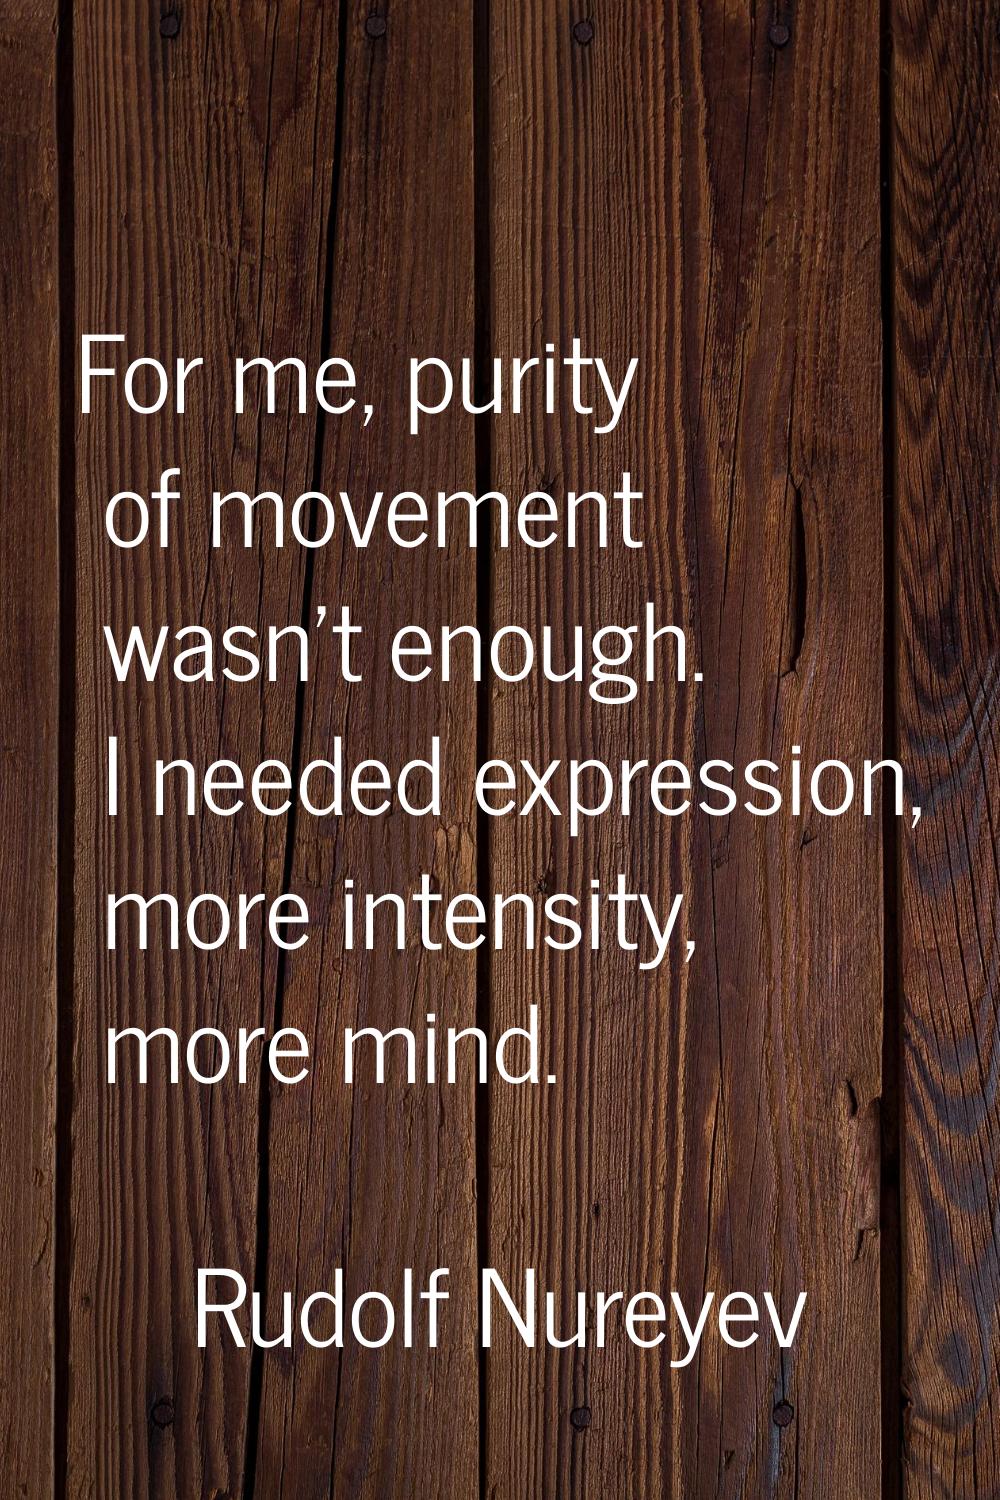 For me, purity of movement wasn't enough. I needed expression, more intensity, more mind.